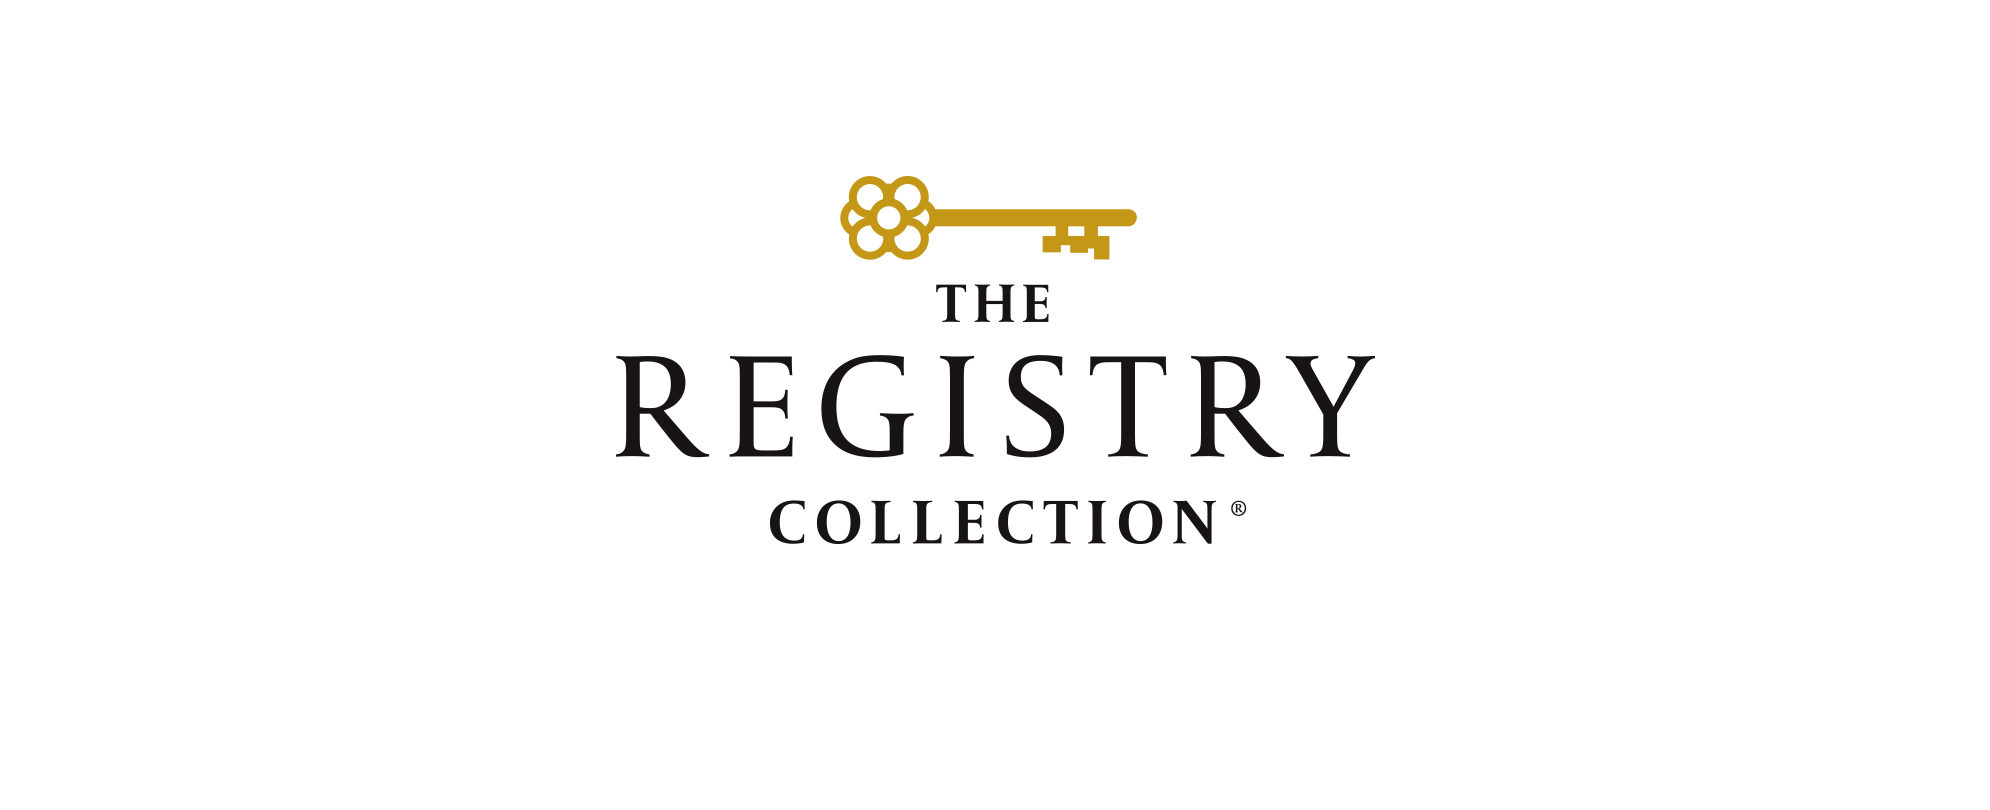 The Registry Collection logo